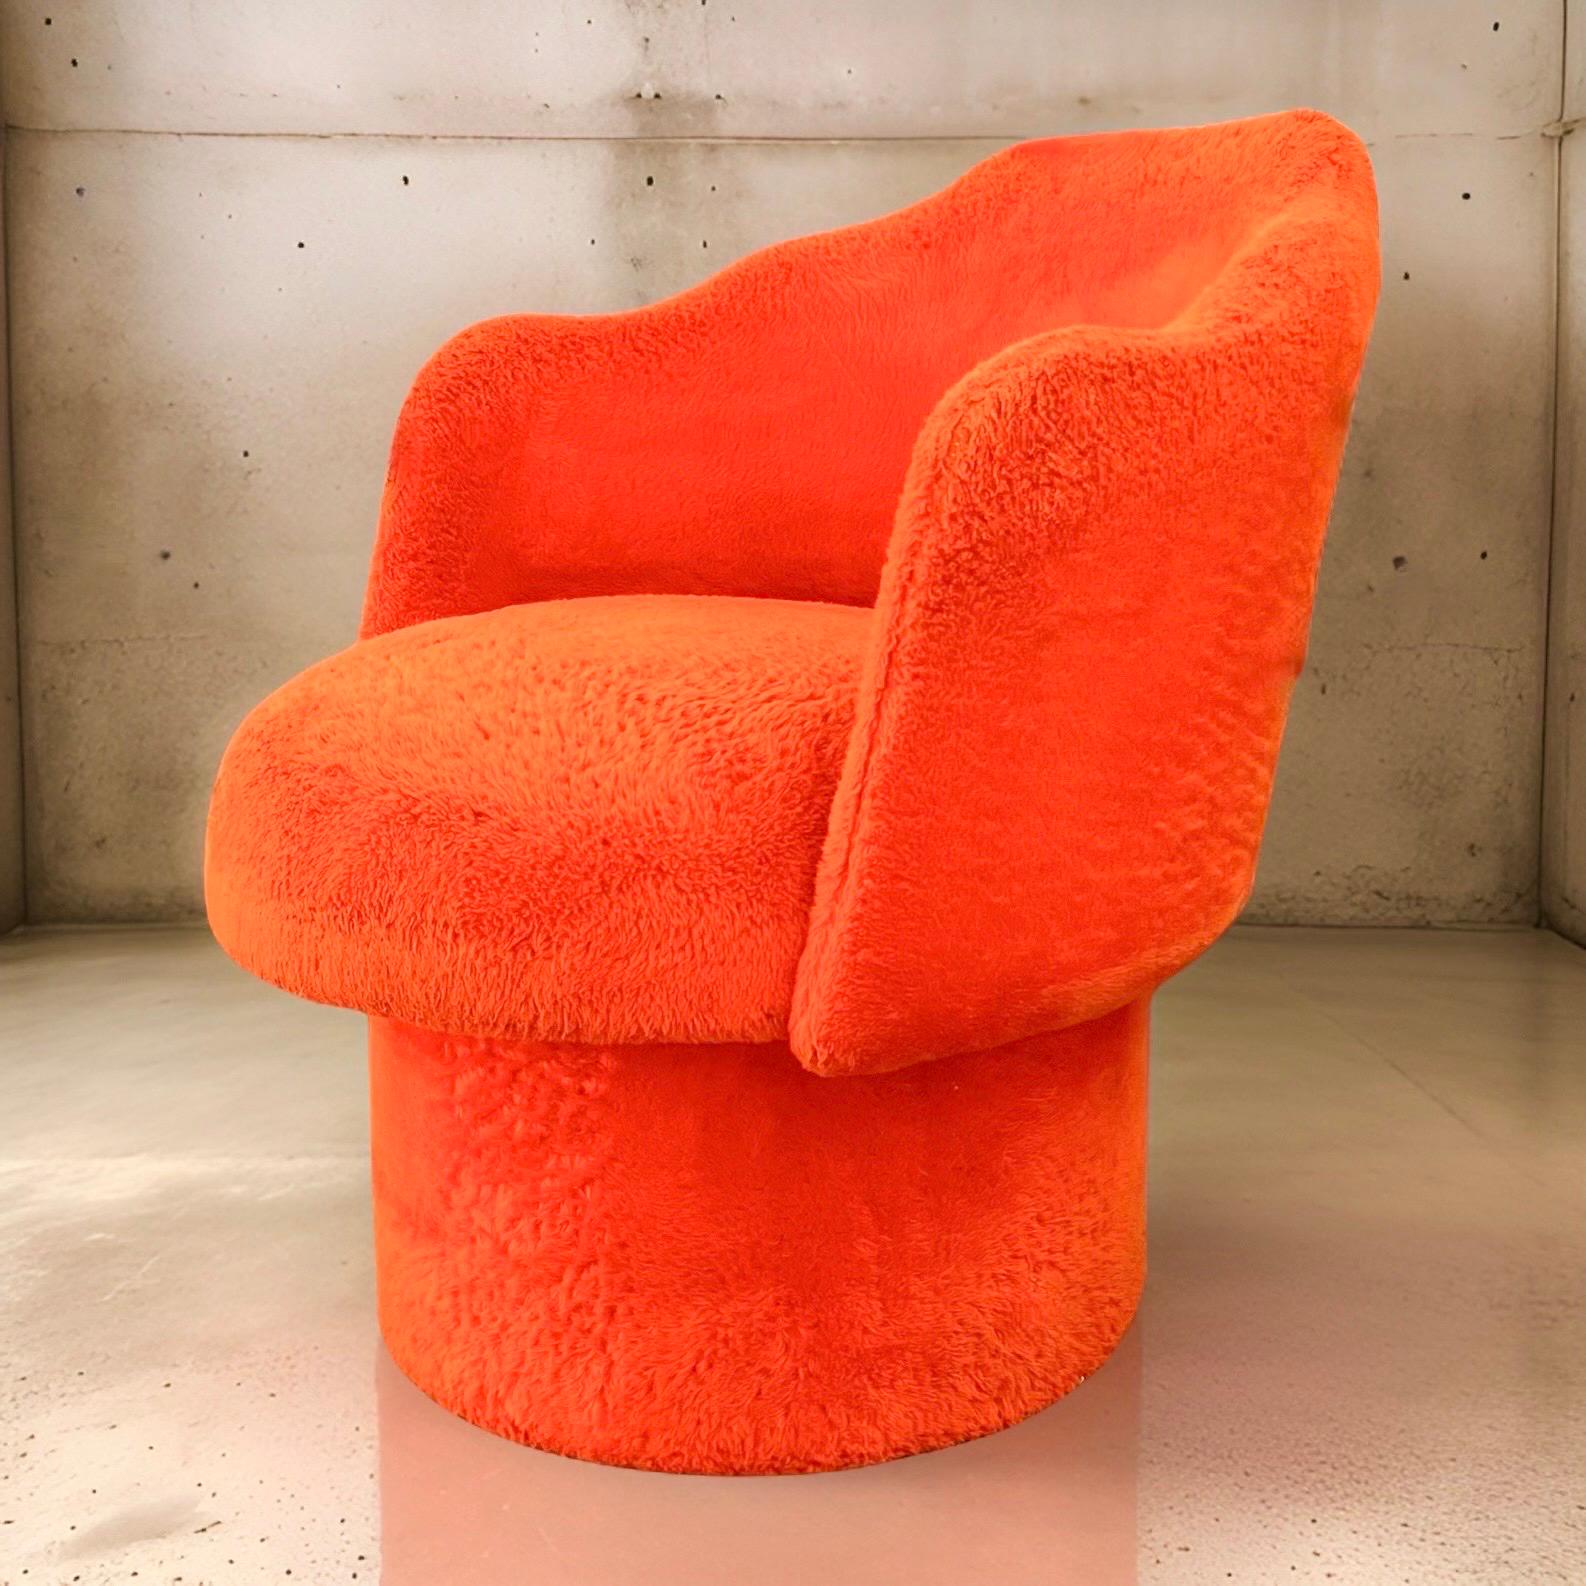 1960s Mid-Century Orange Swivel Barrel Lounge Chair in the Style of Adrian Pearsall. Features original tangerine-orange upholstery that is soft to the touch and has a shaggy flair - similar to boucle fabric but with a little more lift and softer